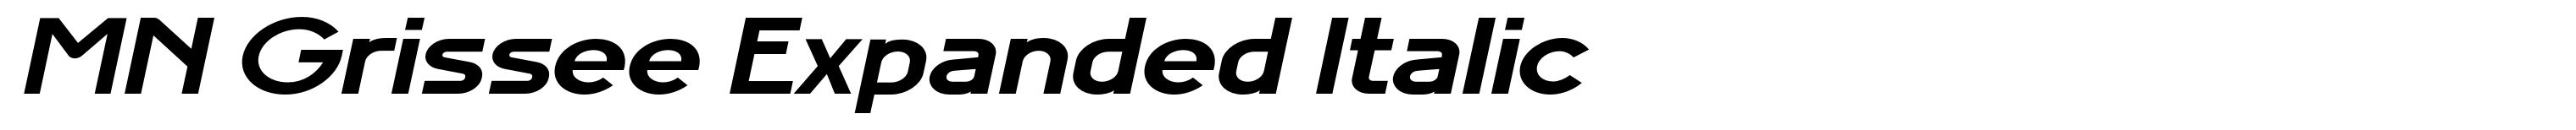 MN Grissee Expanded Italic